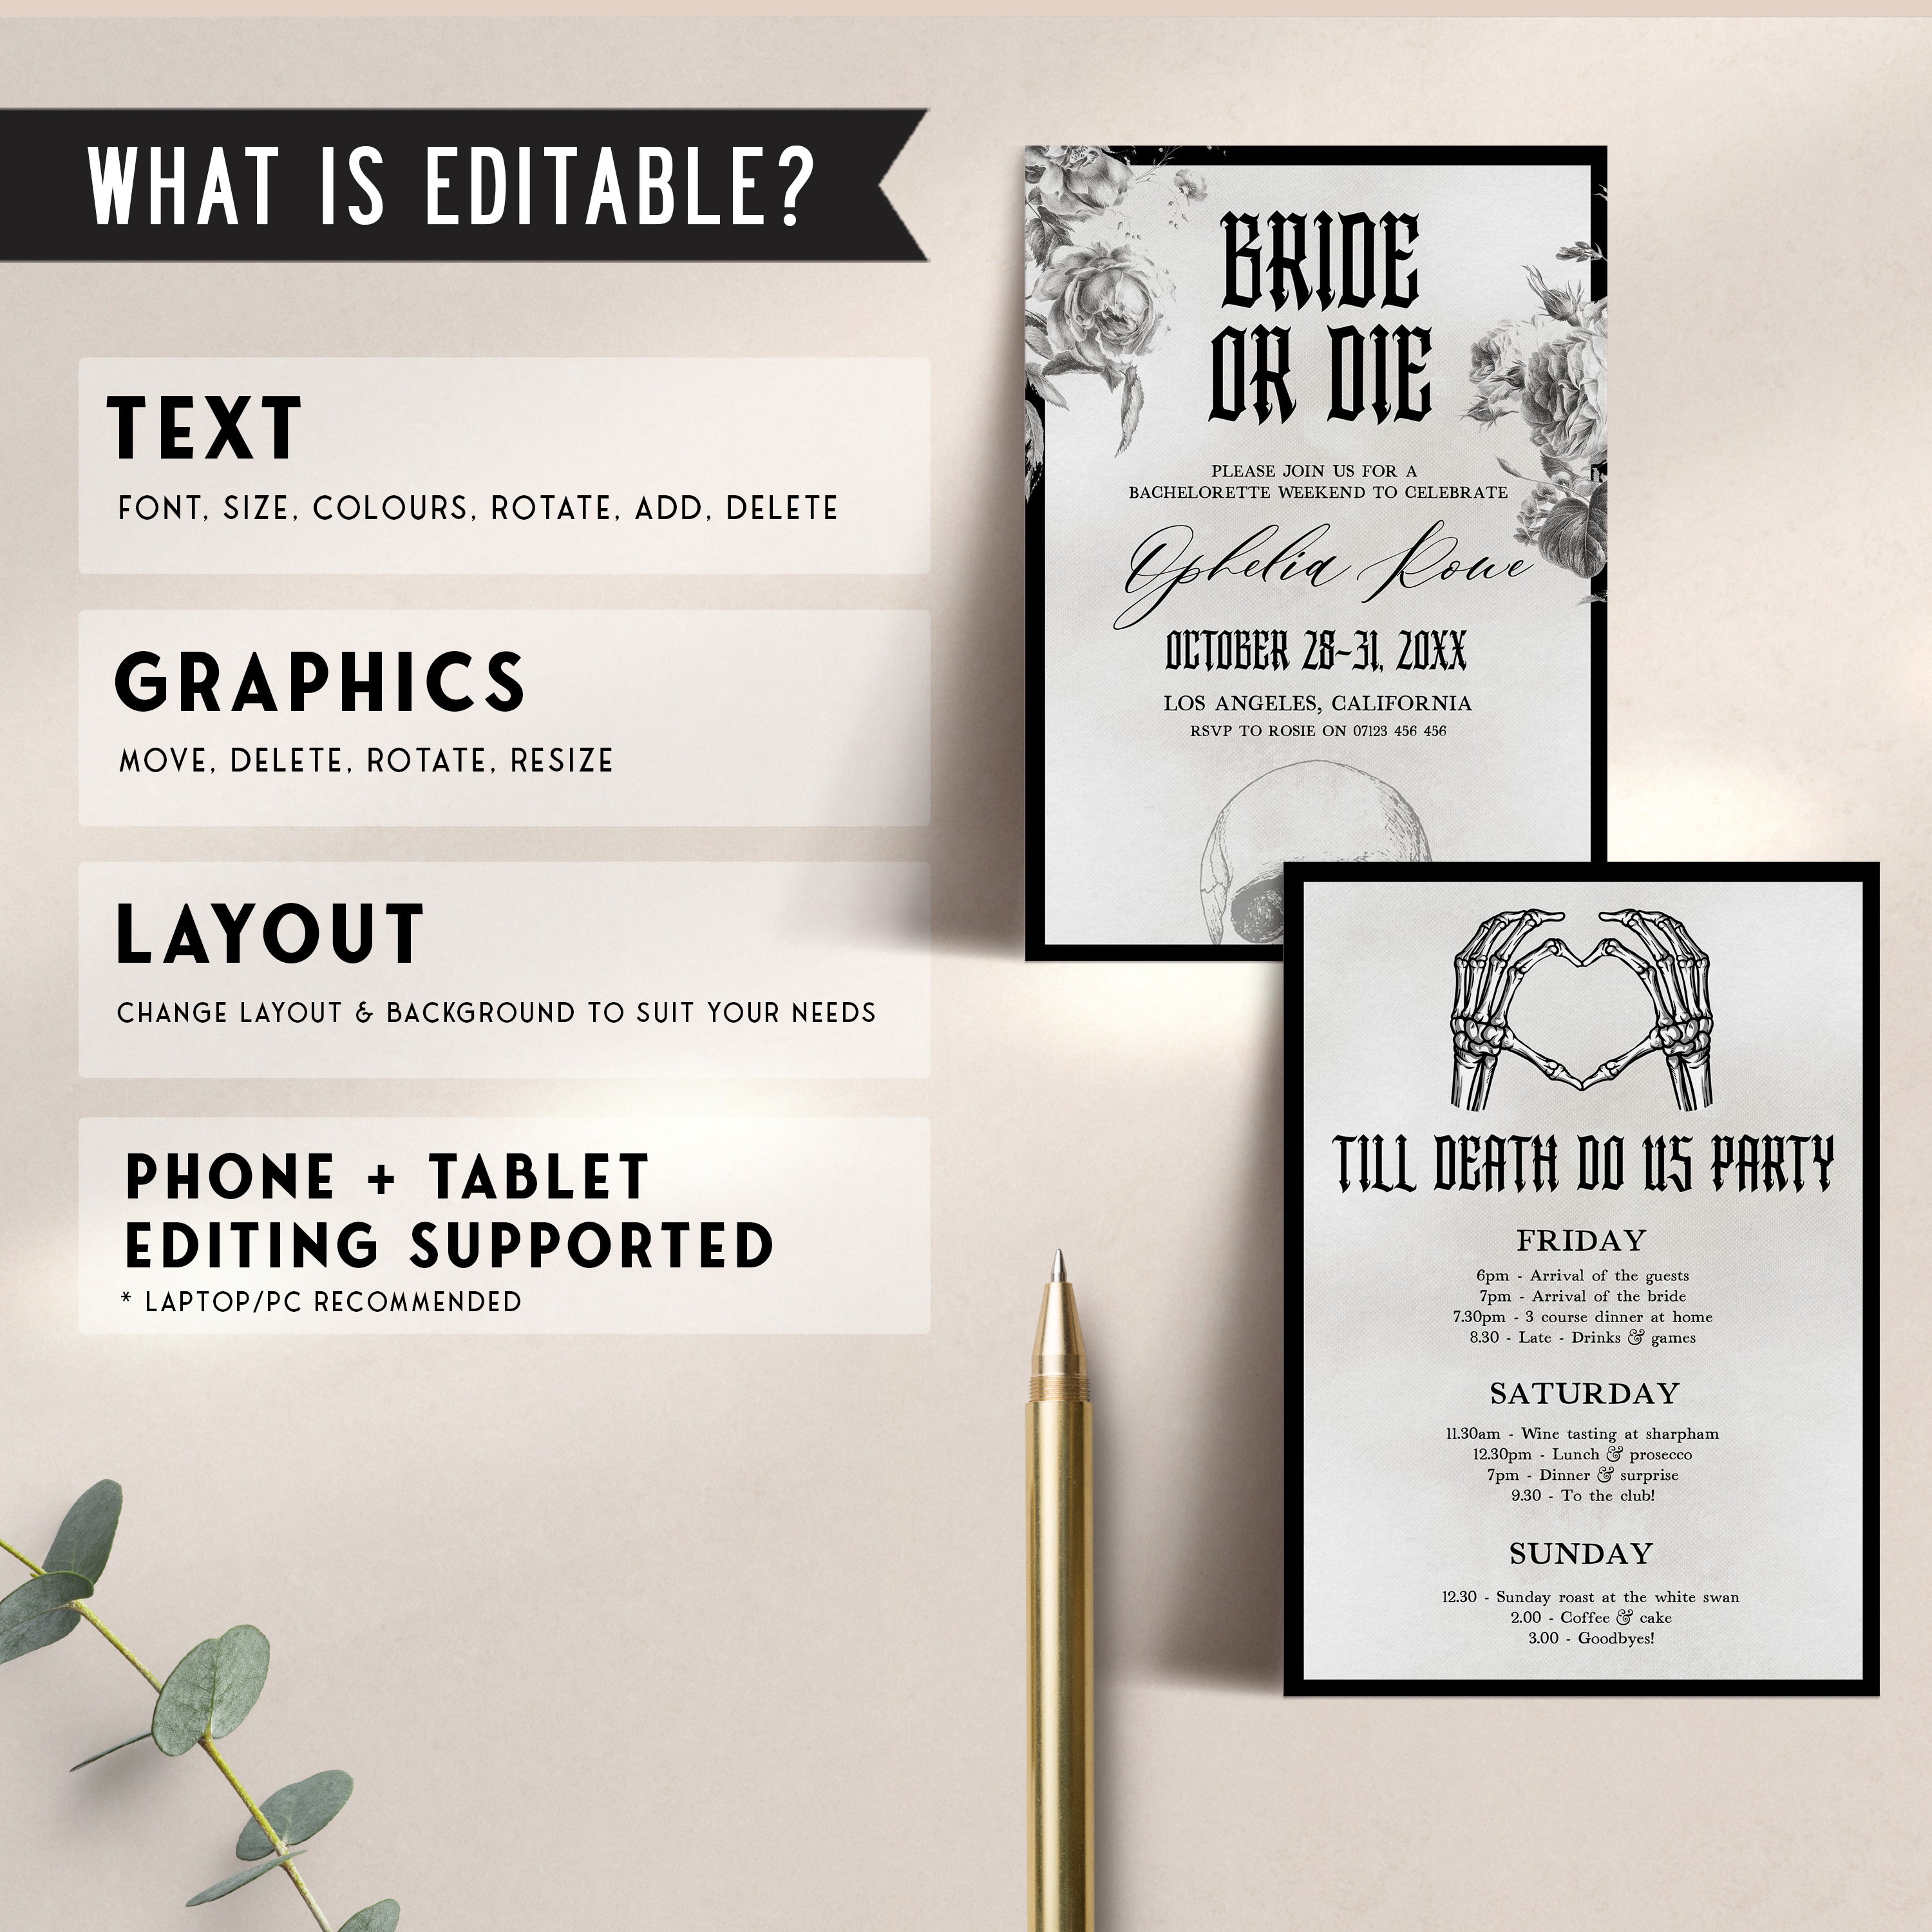 Fully editable and printable bridal shower and bachelorette invitation with a gothic design. Perfect for a Bride or Die or Death Us To Party bridal shower themed party